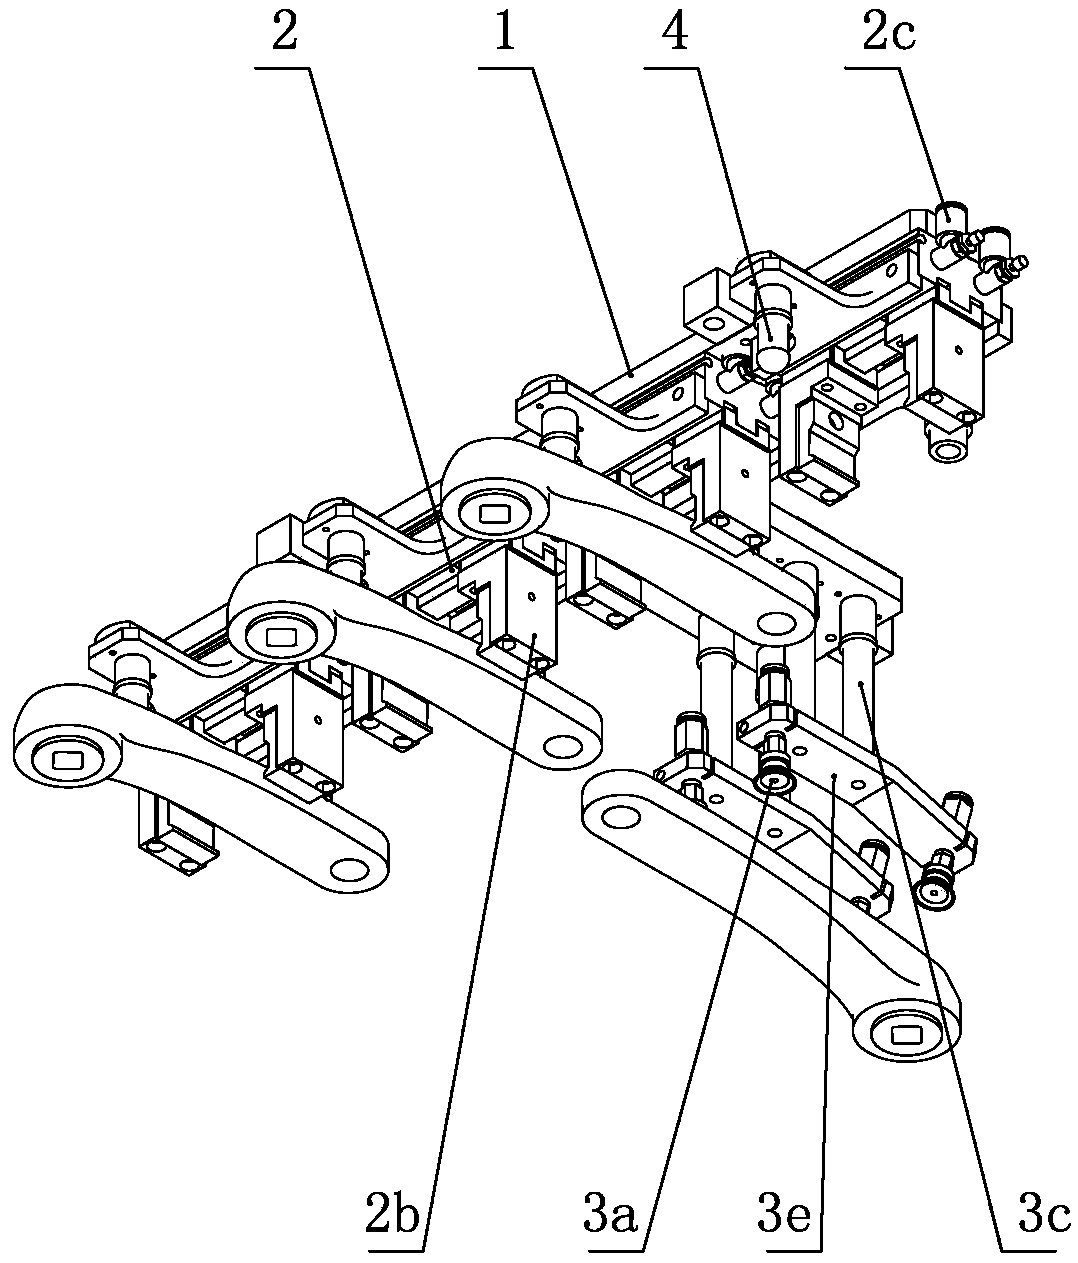 A rotatable two-way reclaiming floating manipulator